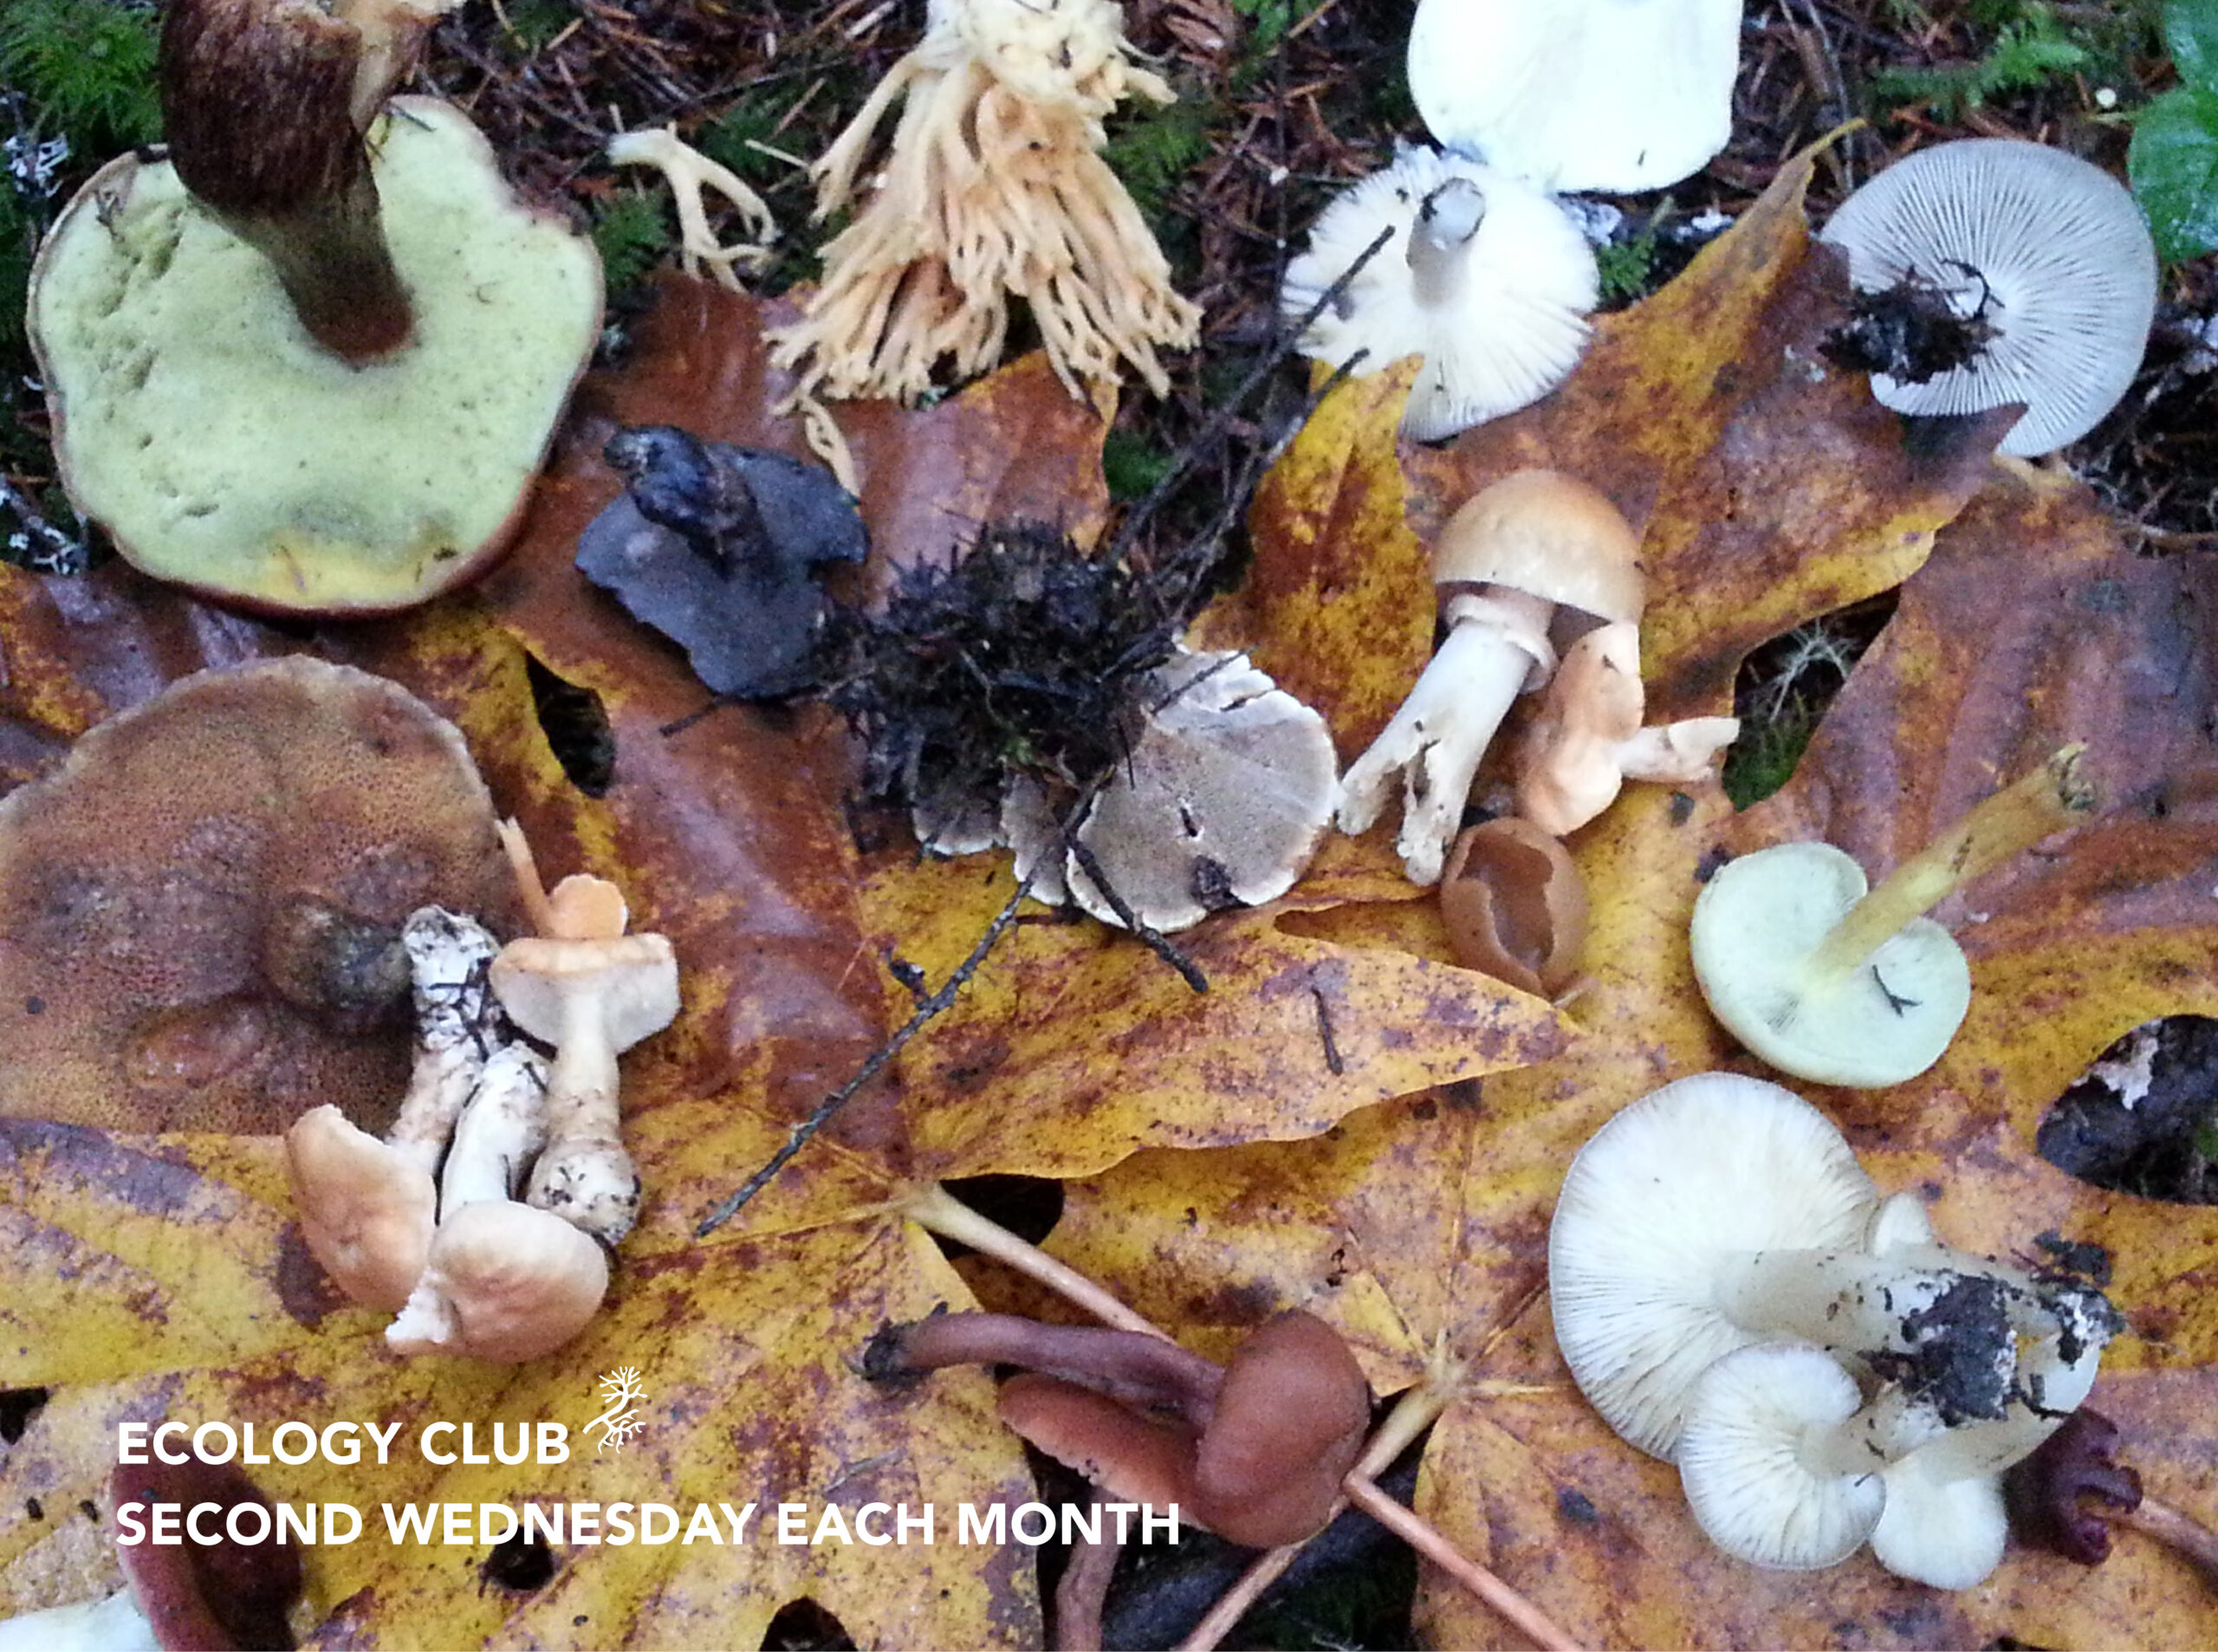 Cellphone photo of several different types of mushrooms laying on wet, yellow leaves. Their shapes and sizes vary, color as well. In the bottom left corner white text reads: Ecology Club, second Wednesday each month.